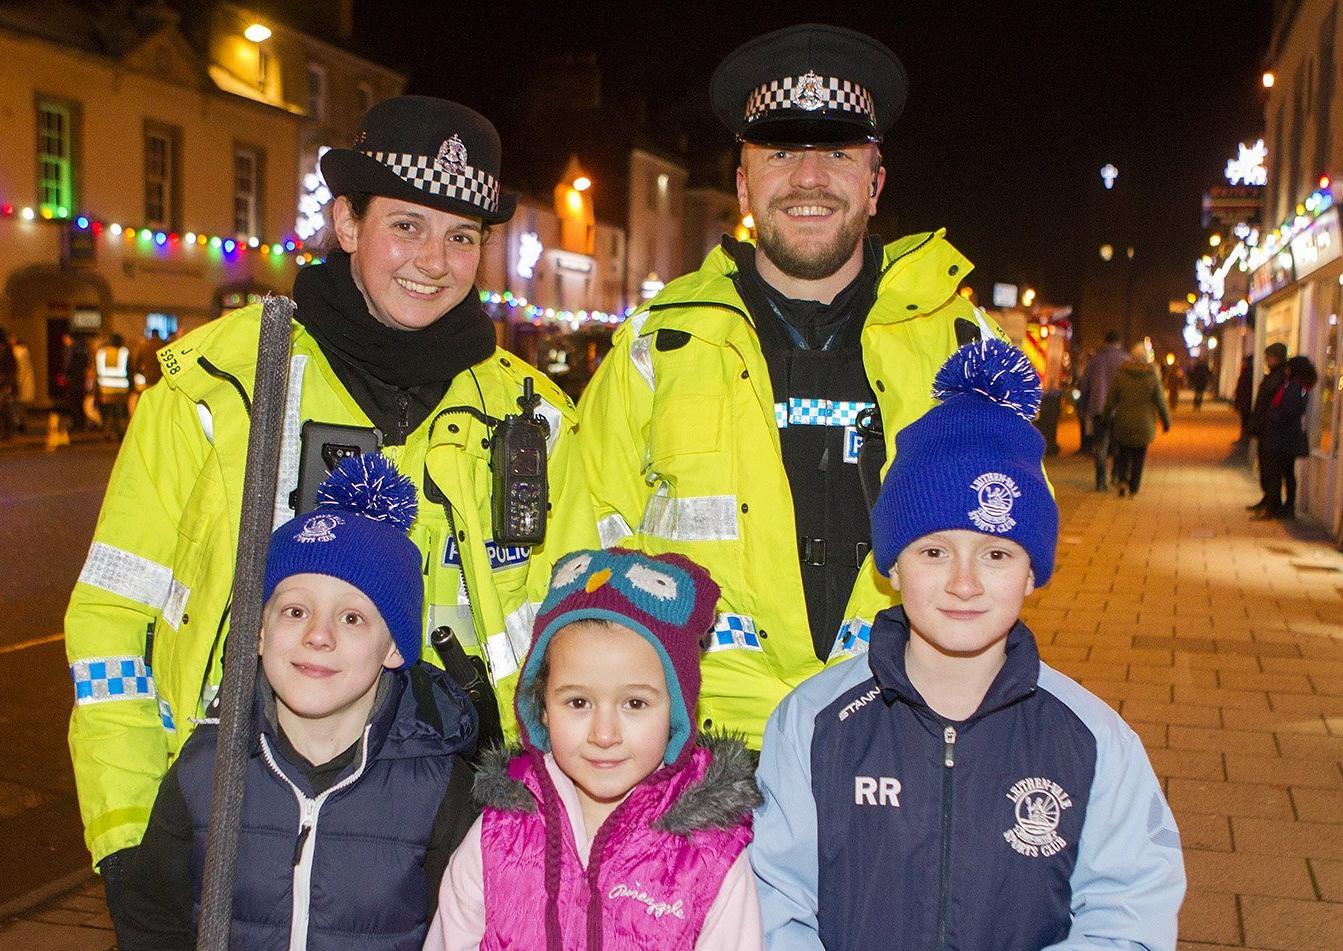 PC's Nicola Robb and Matthew Aitken from Peebles and Galashiels with, Ruairadh Robb, Cameron Hogarth and Caitlin Robb.